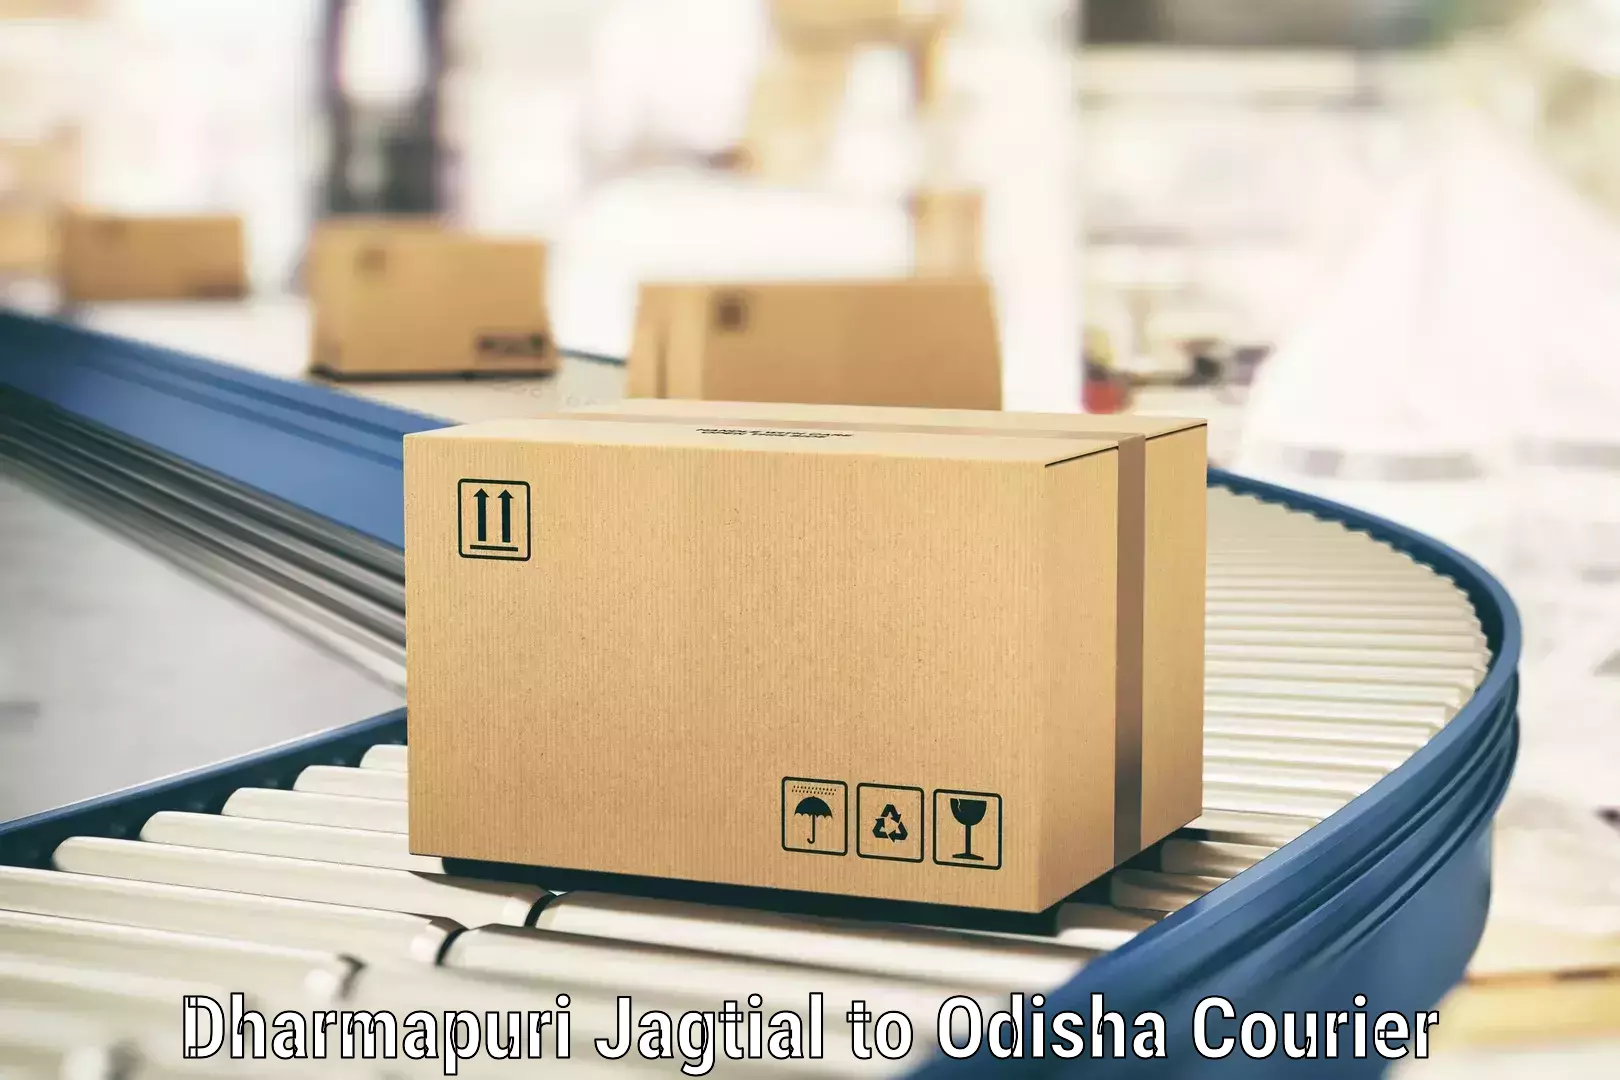 Personal courier services Dharmapuri Jagtial to Odisha